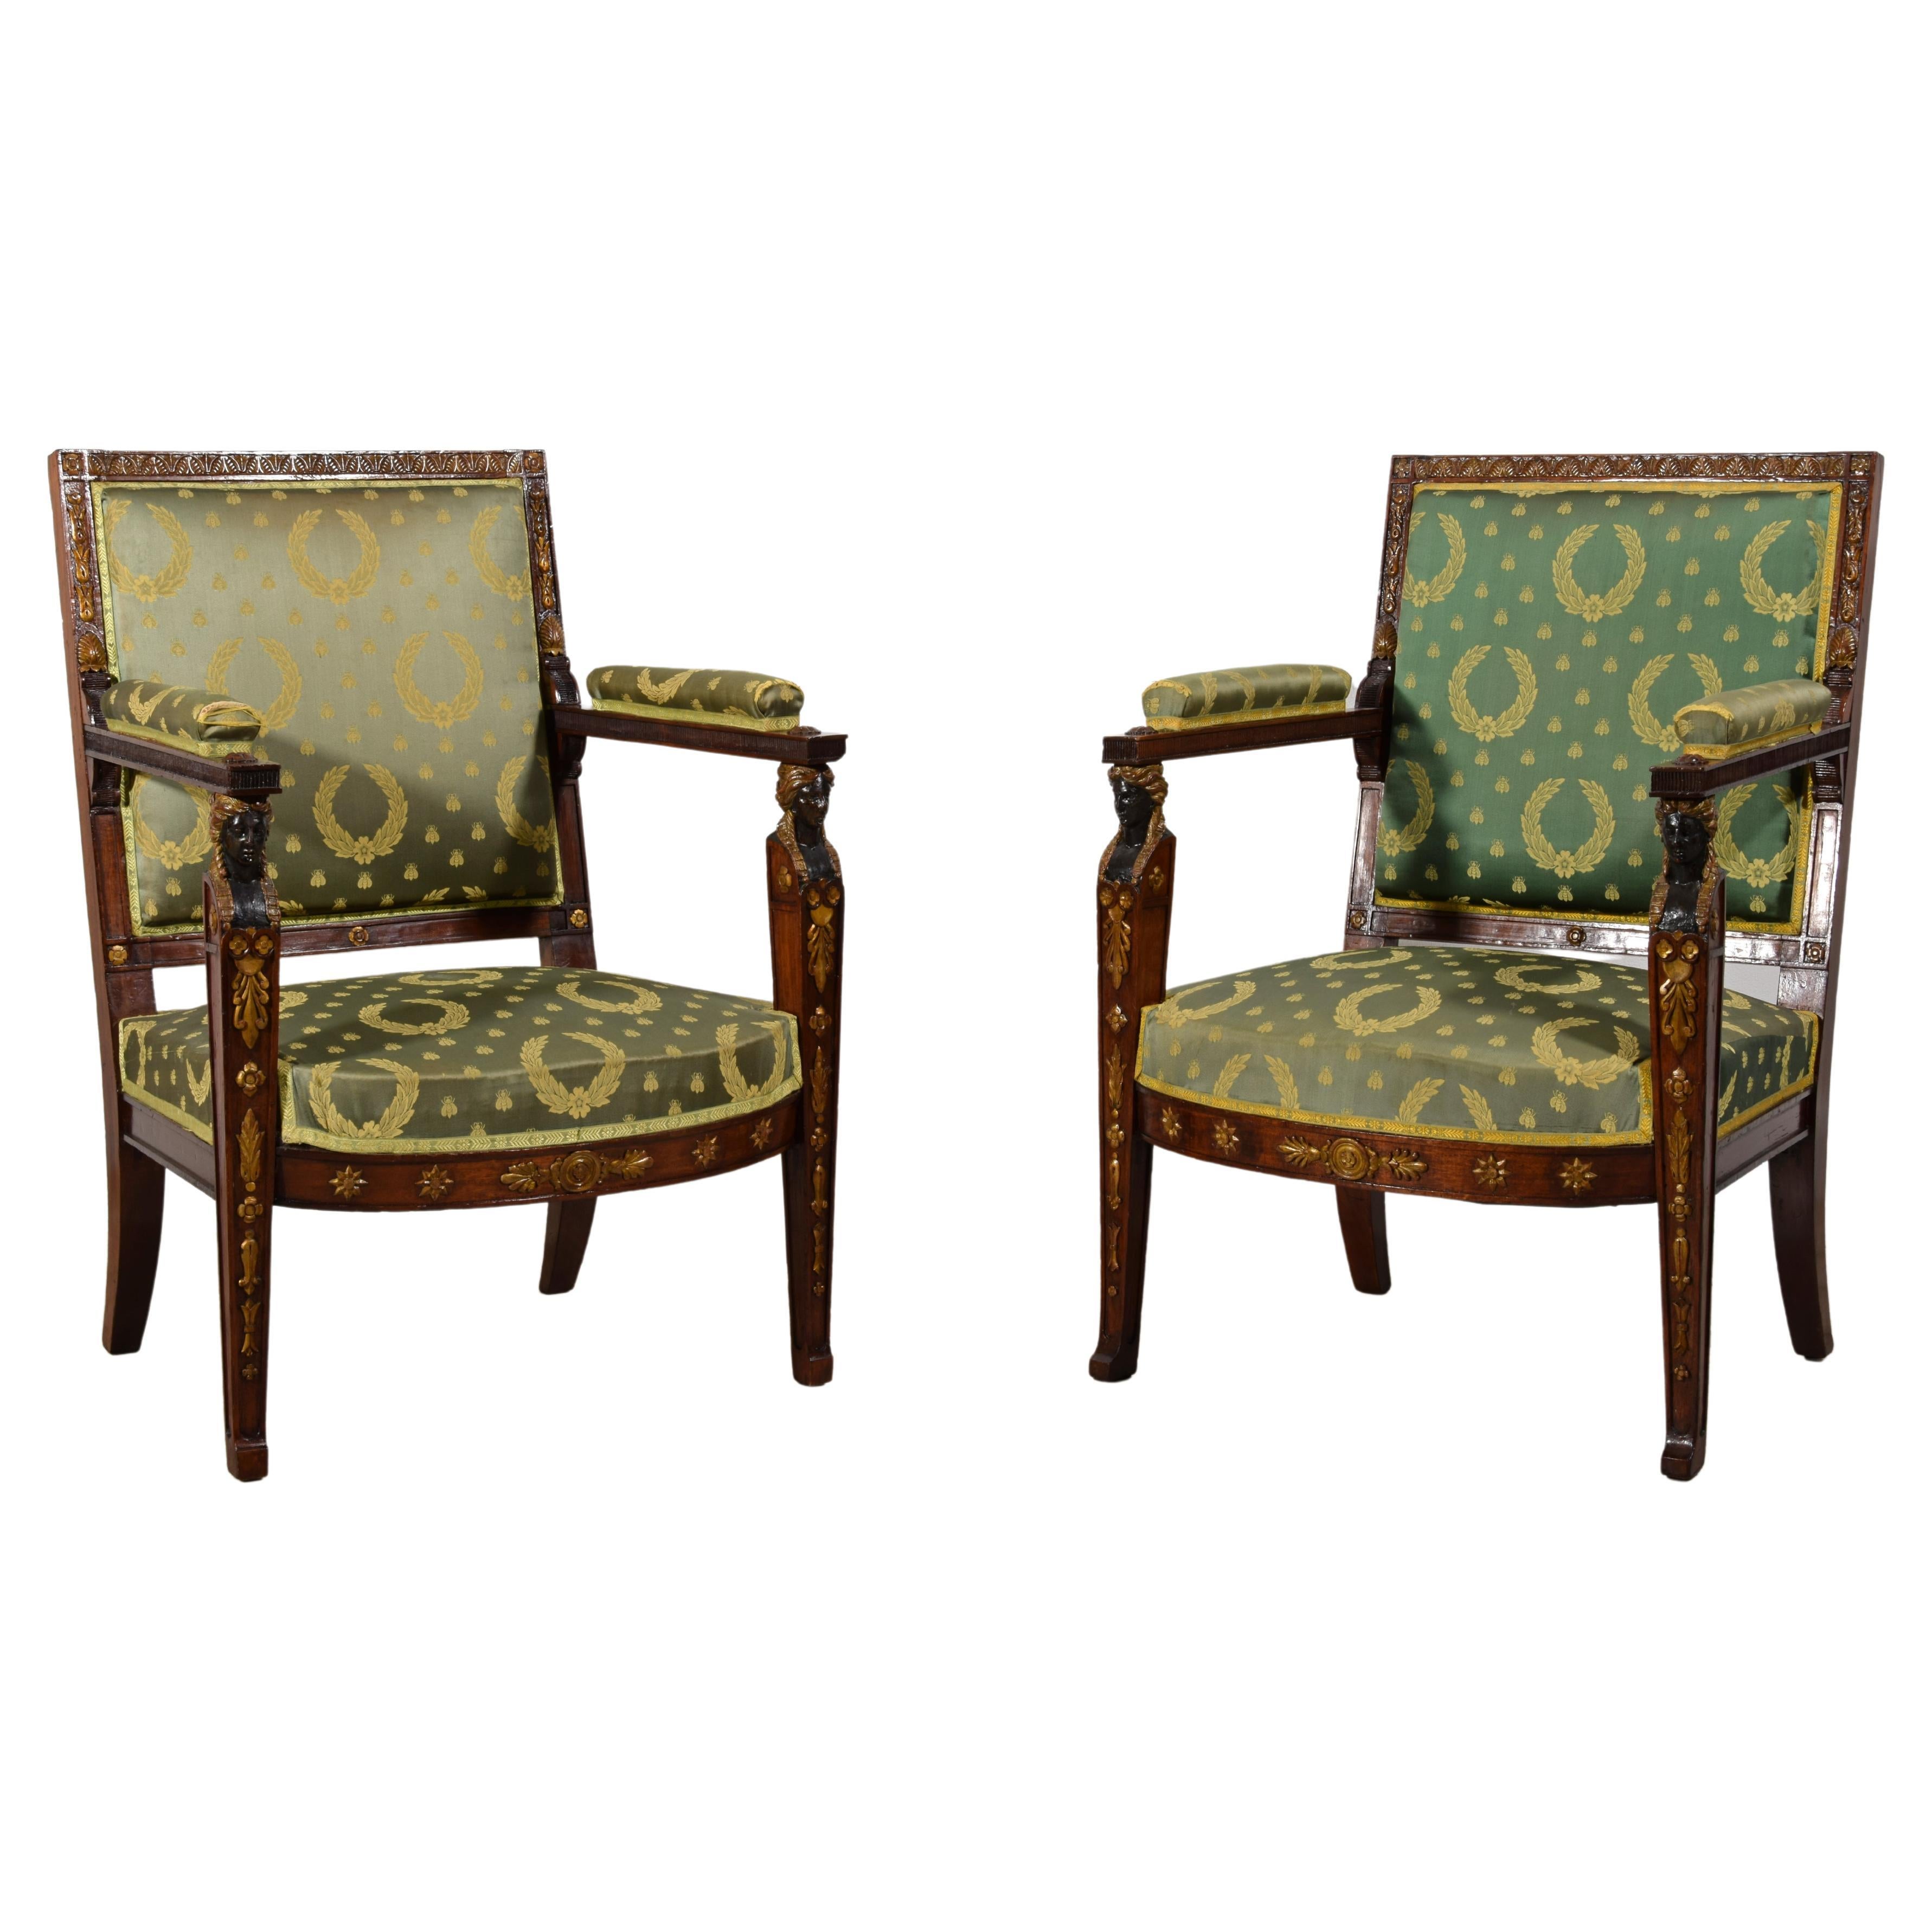 19th Century, Pair of French Empire Style Wood Armchairs For Sale